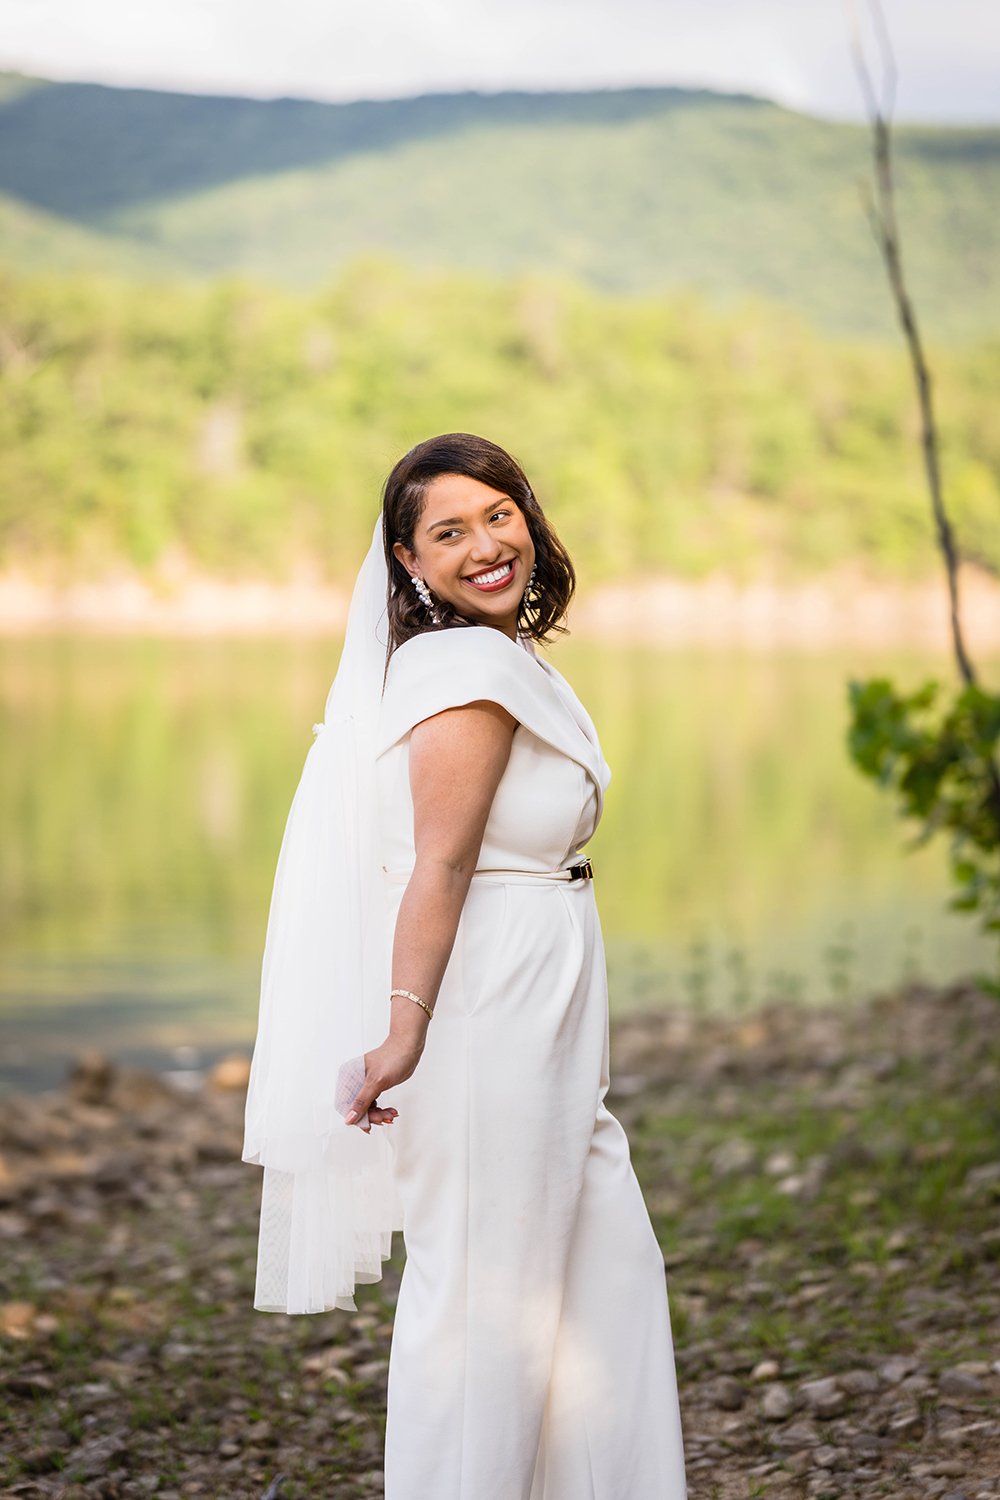 A smiling bride sports a wedding jumpsuit and veil and smiles big for the camera in Roanoke, Virginia, a town along the Blue Ridge Parkway.